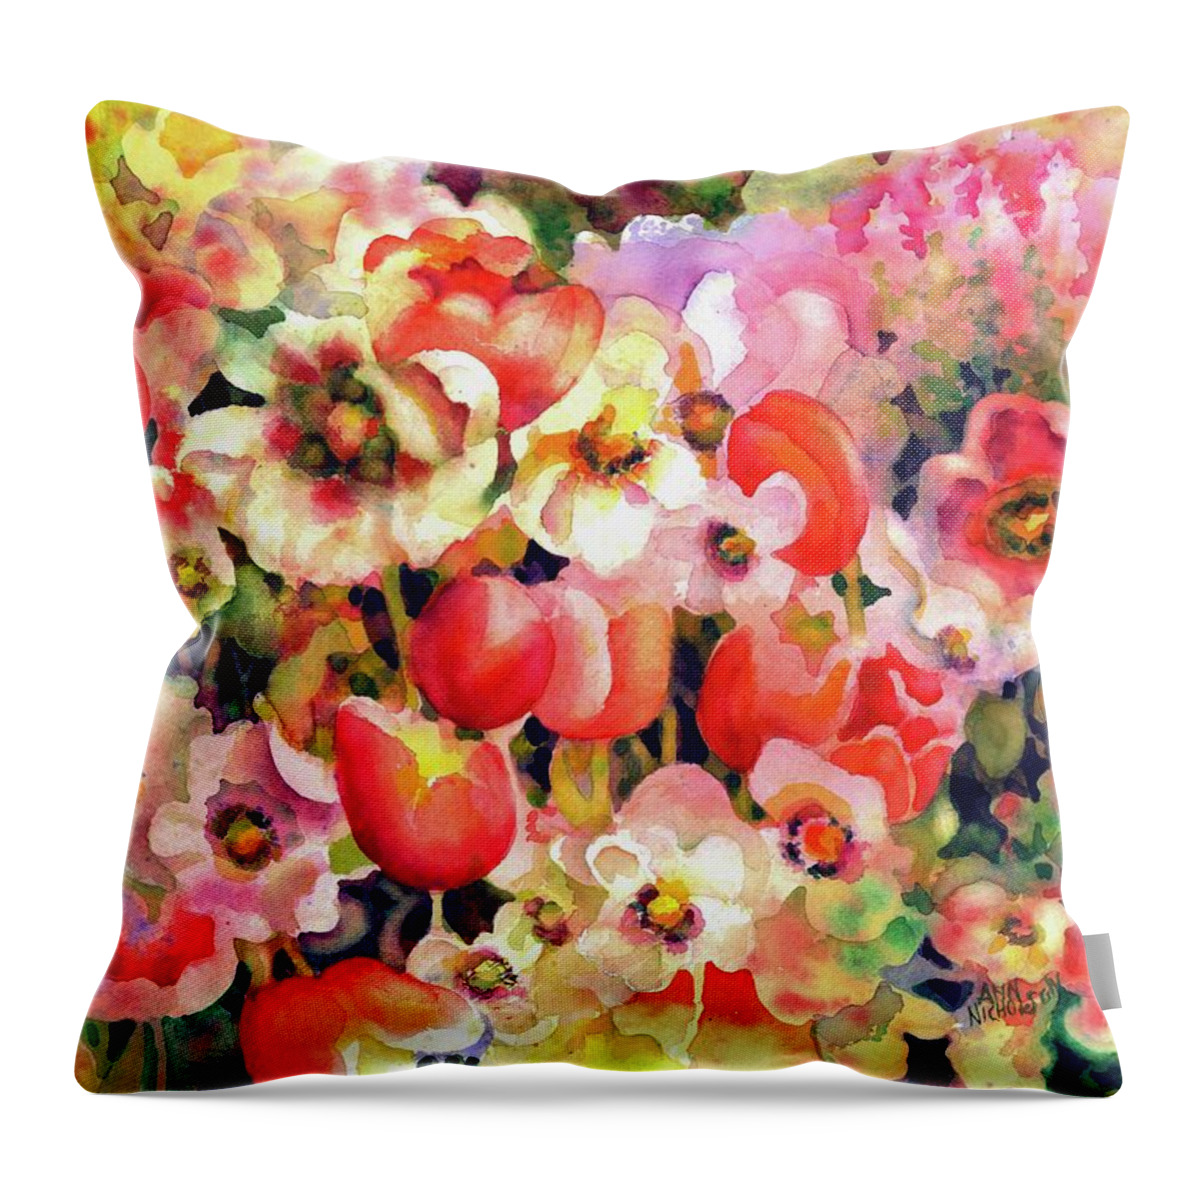 Watercolor Throw Pillow featuring the painting Belle Fleurs II by Ann Nicholson